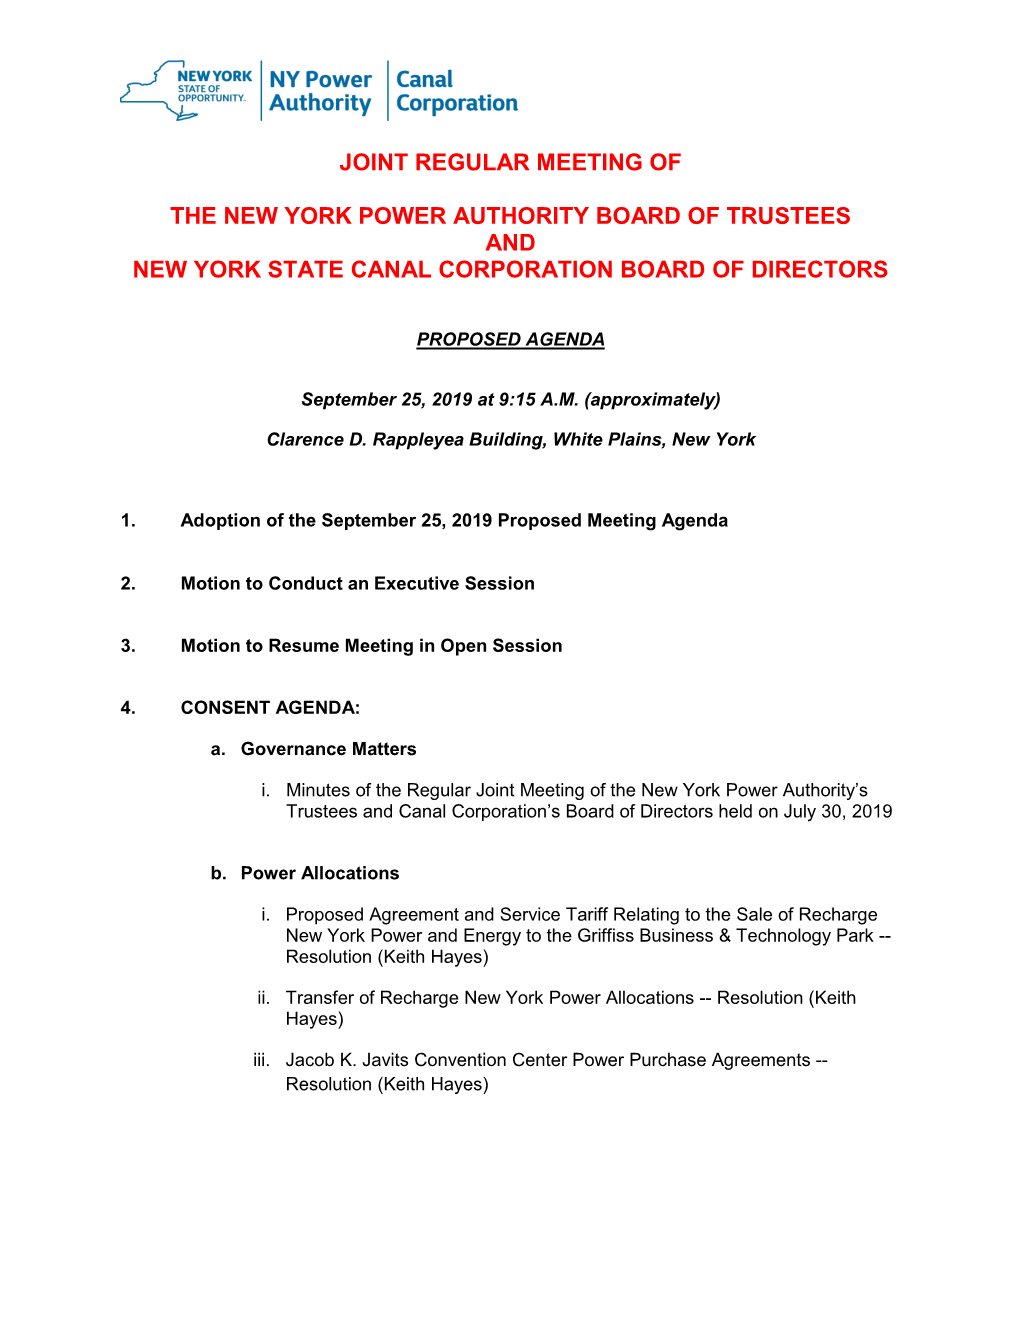 Joint Regular Meeting of the New York Power Authority Board of Trustees